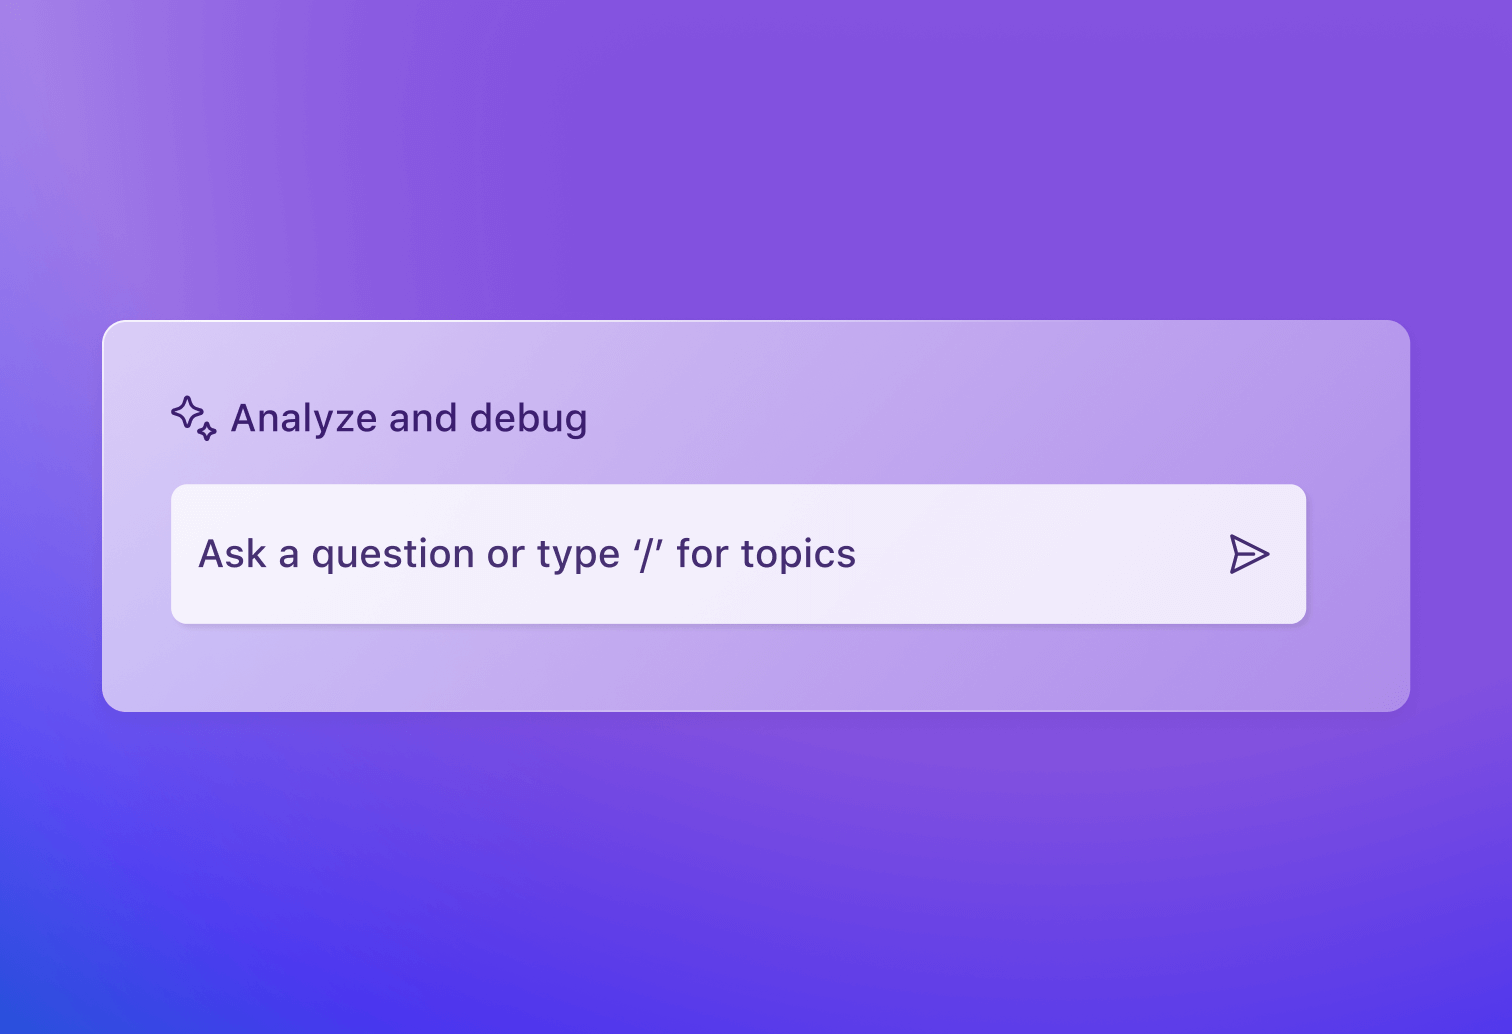 A user interface element with a search bar inviting to 'Ask a question or type '/' for topics'.